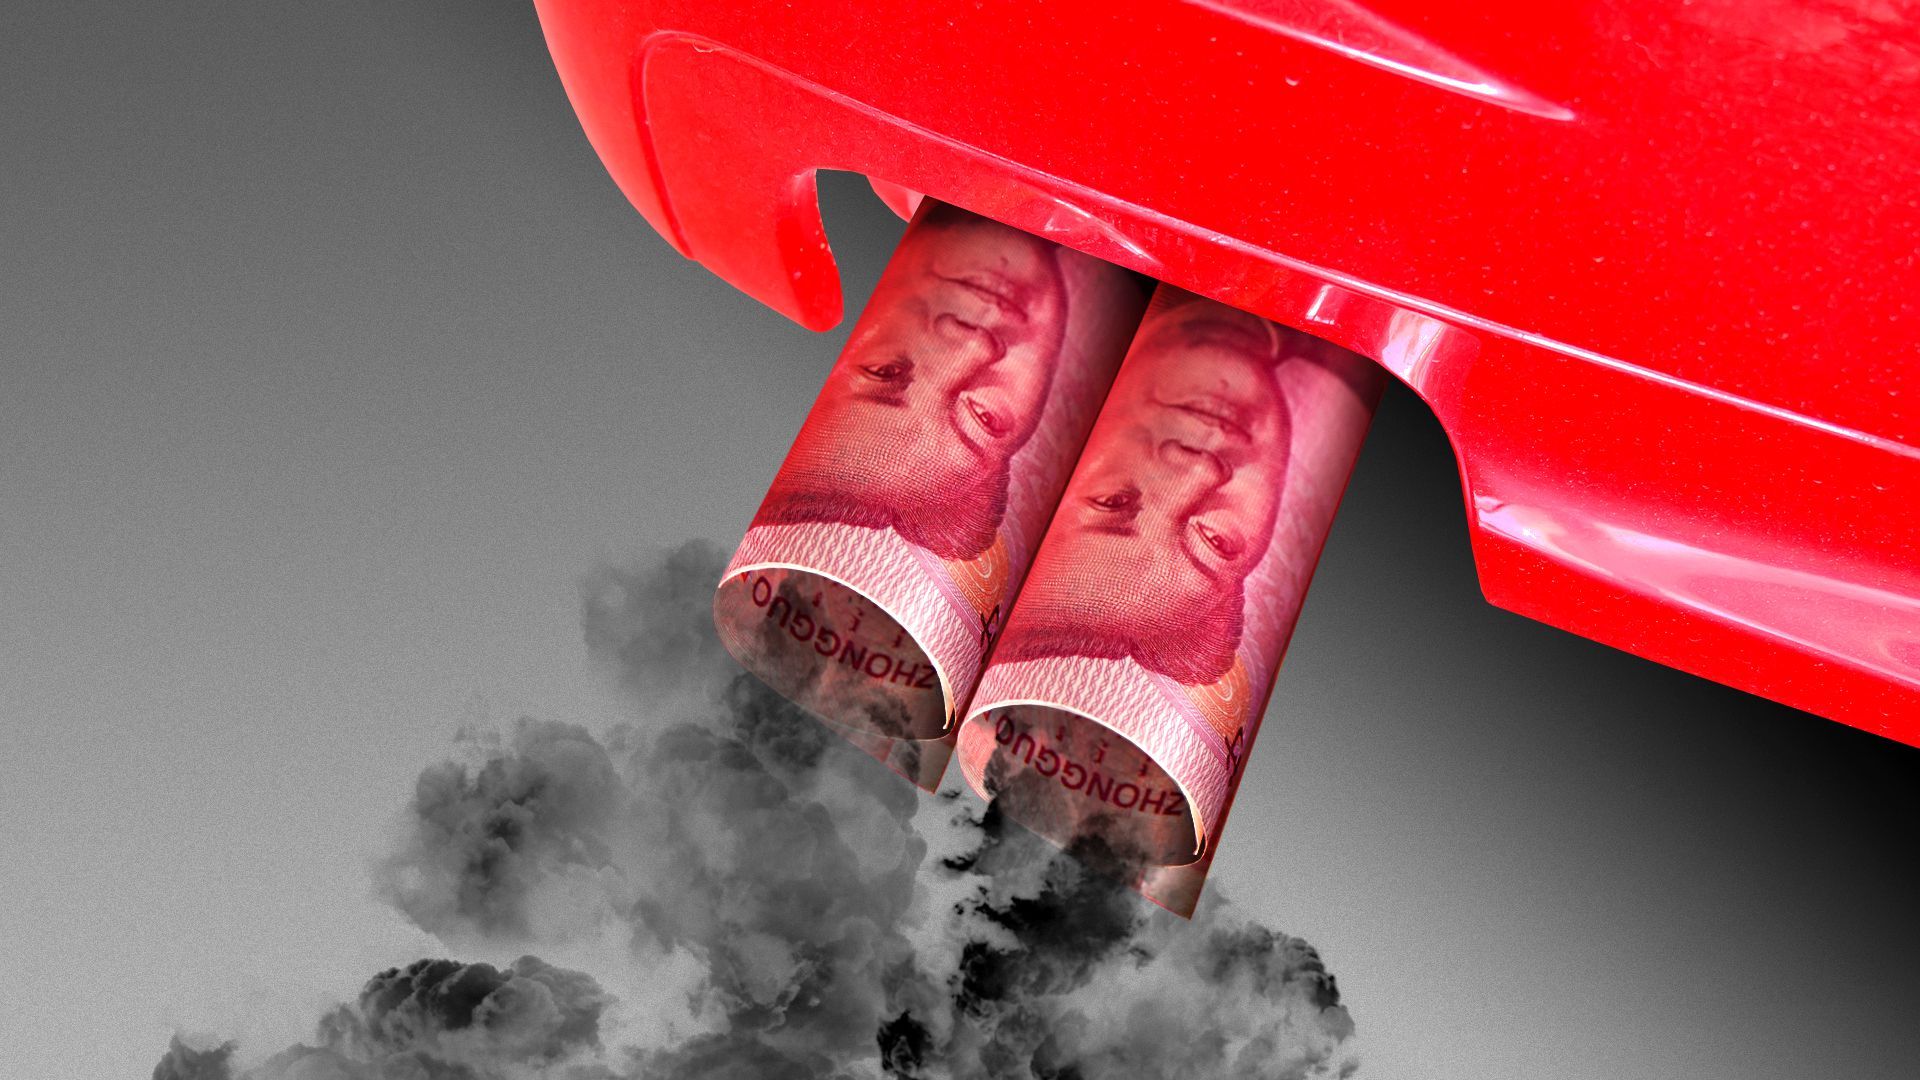 Illustration of a car's tailpipe replaced with rolled up 100 Yuan banknotes, sputtering exhaust